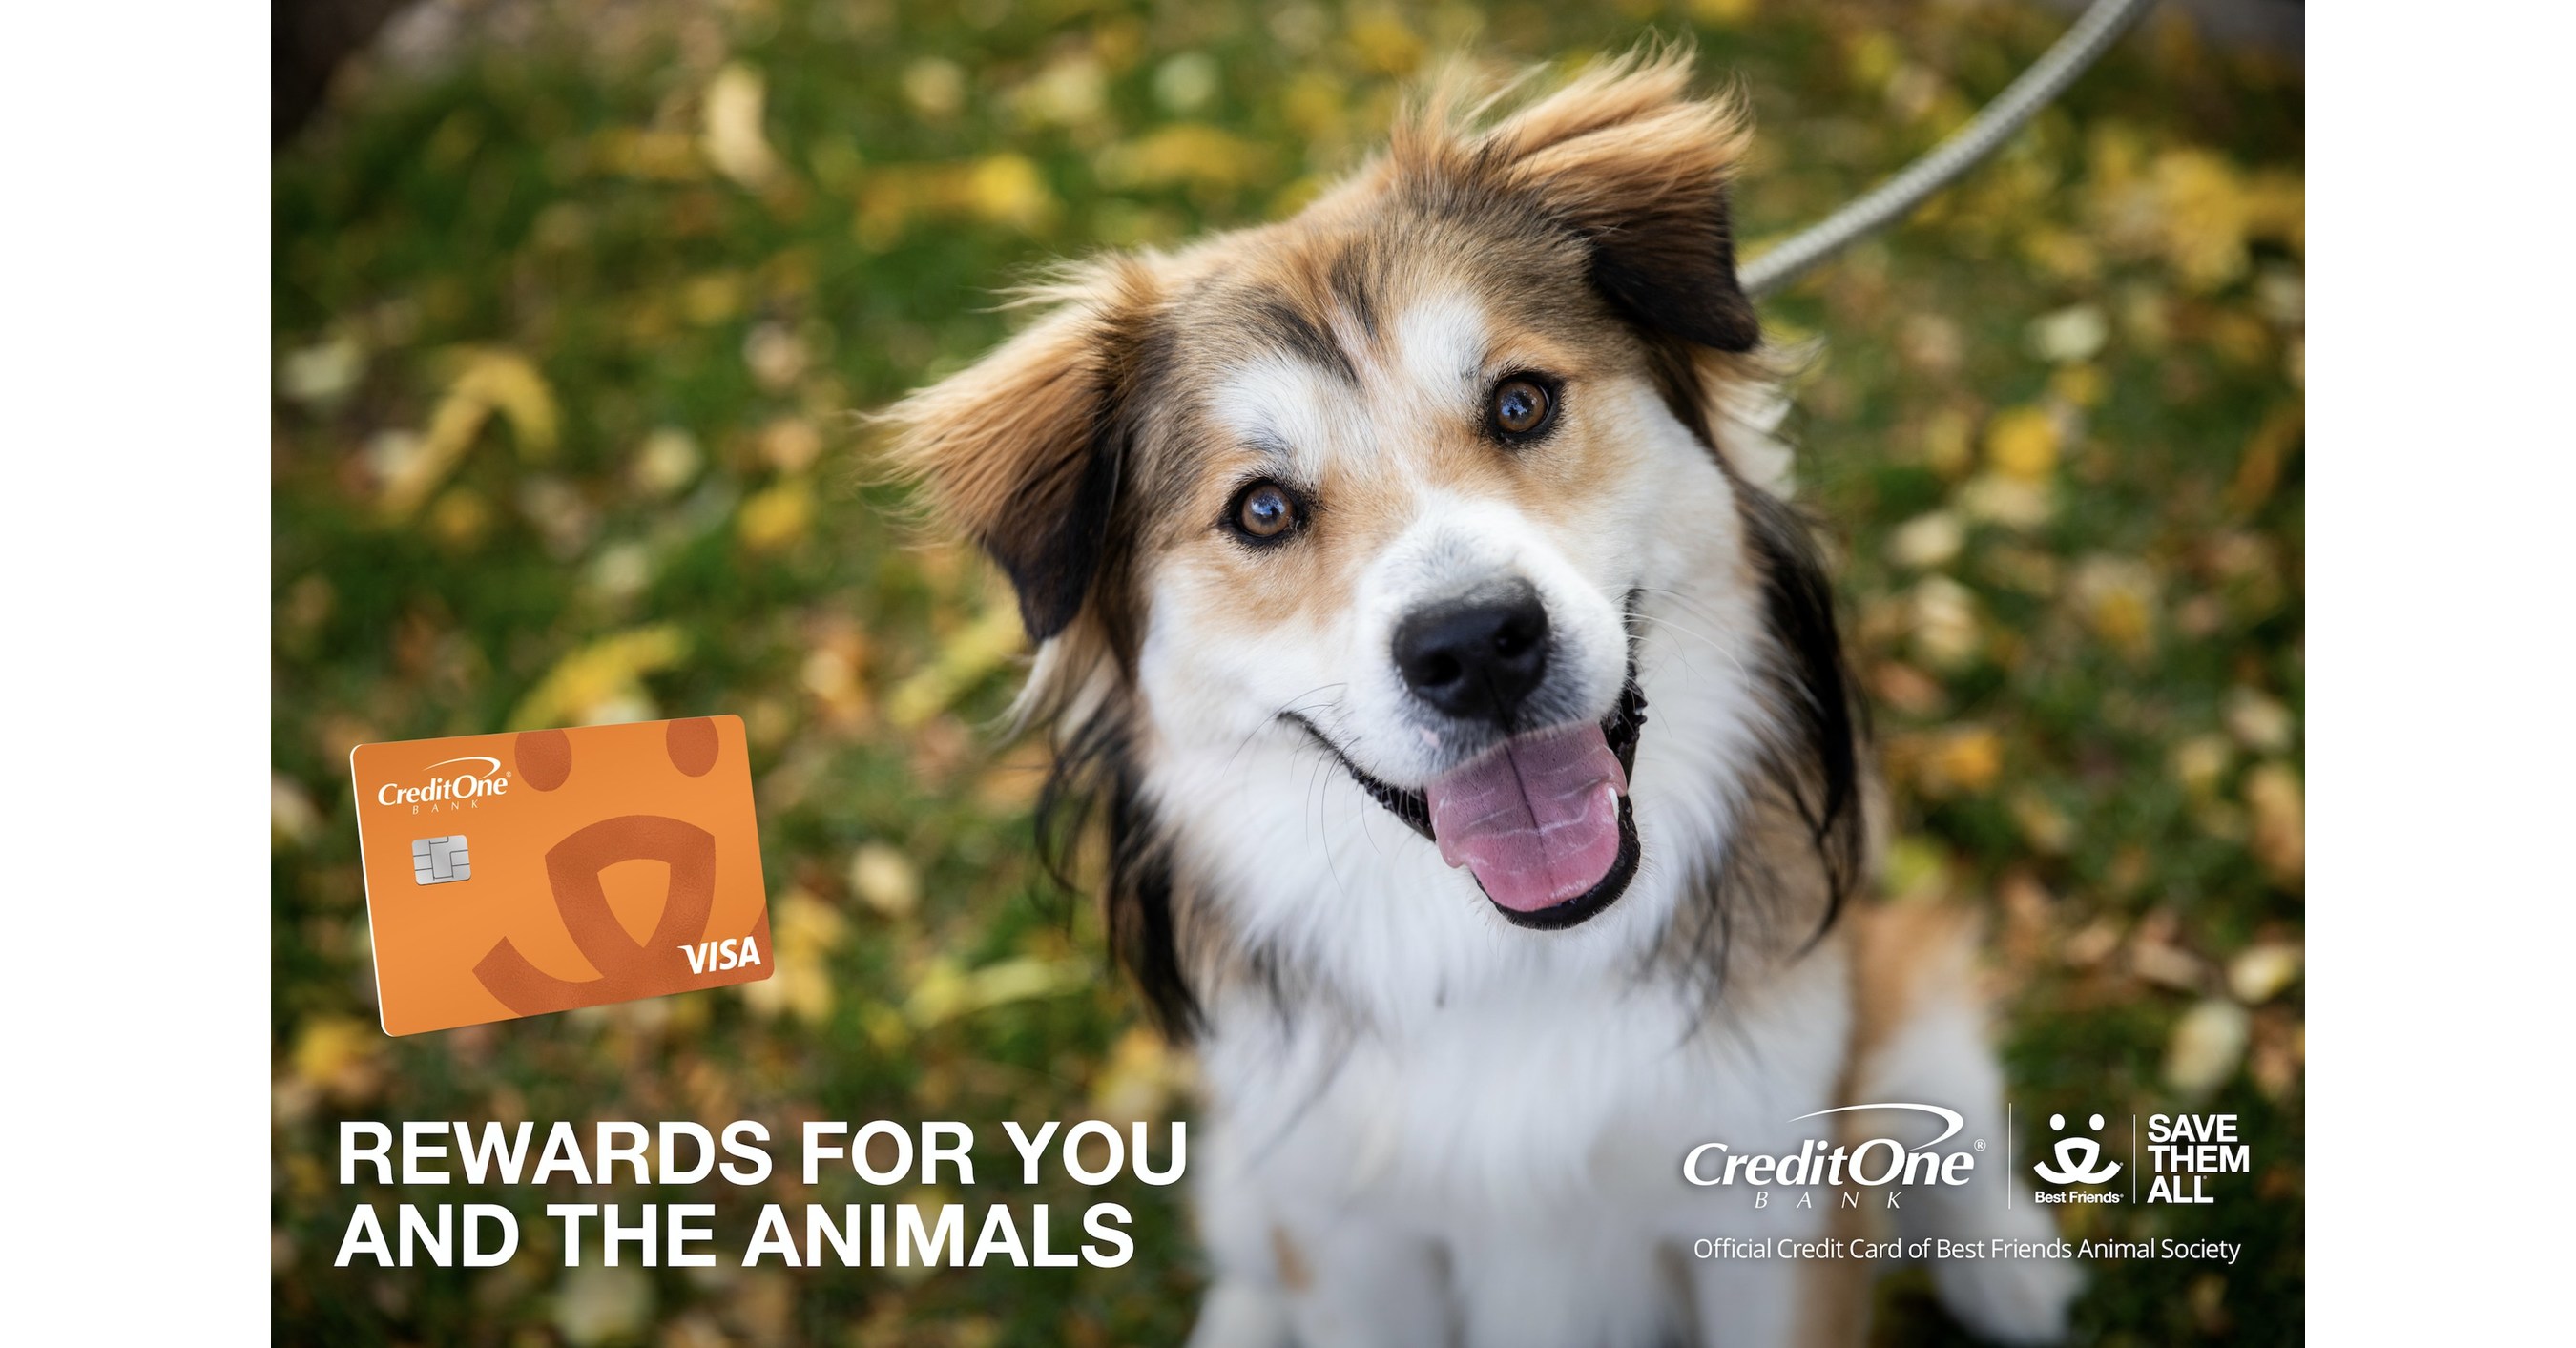 Credit One Bank Launches Credit Card to Support Best Friends Animal Society